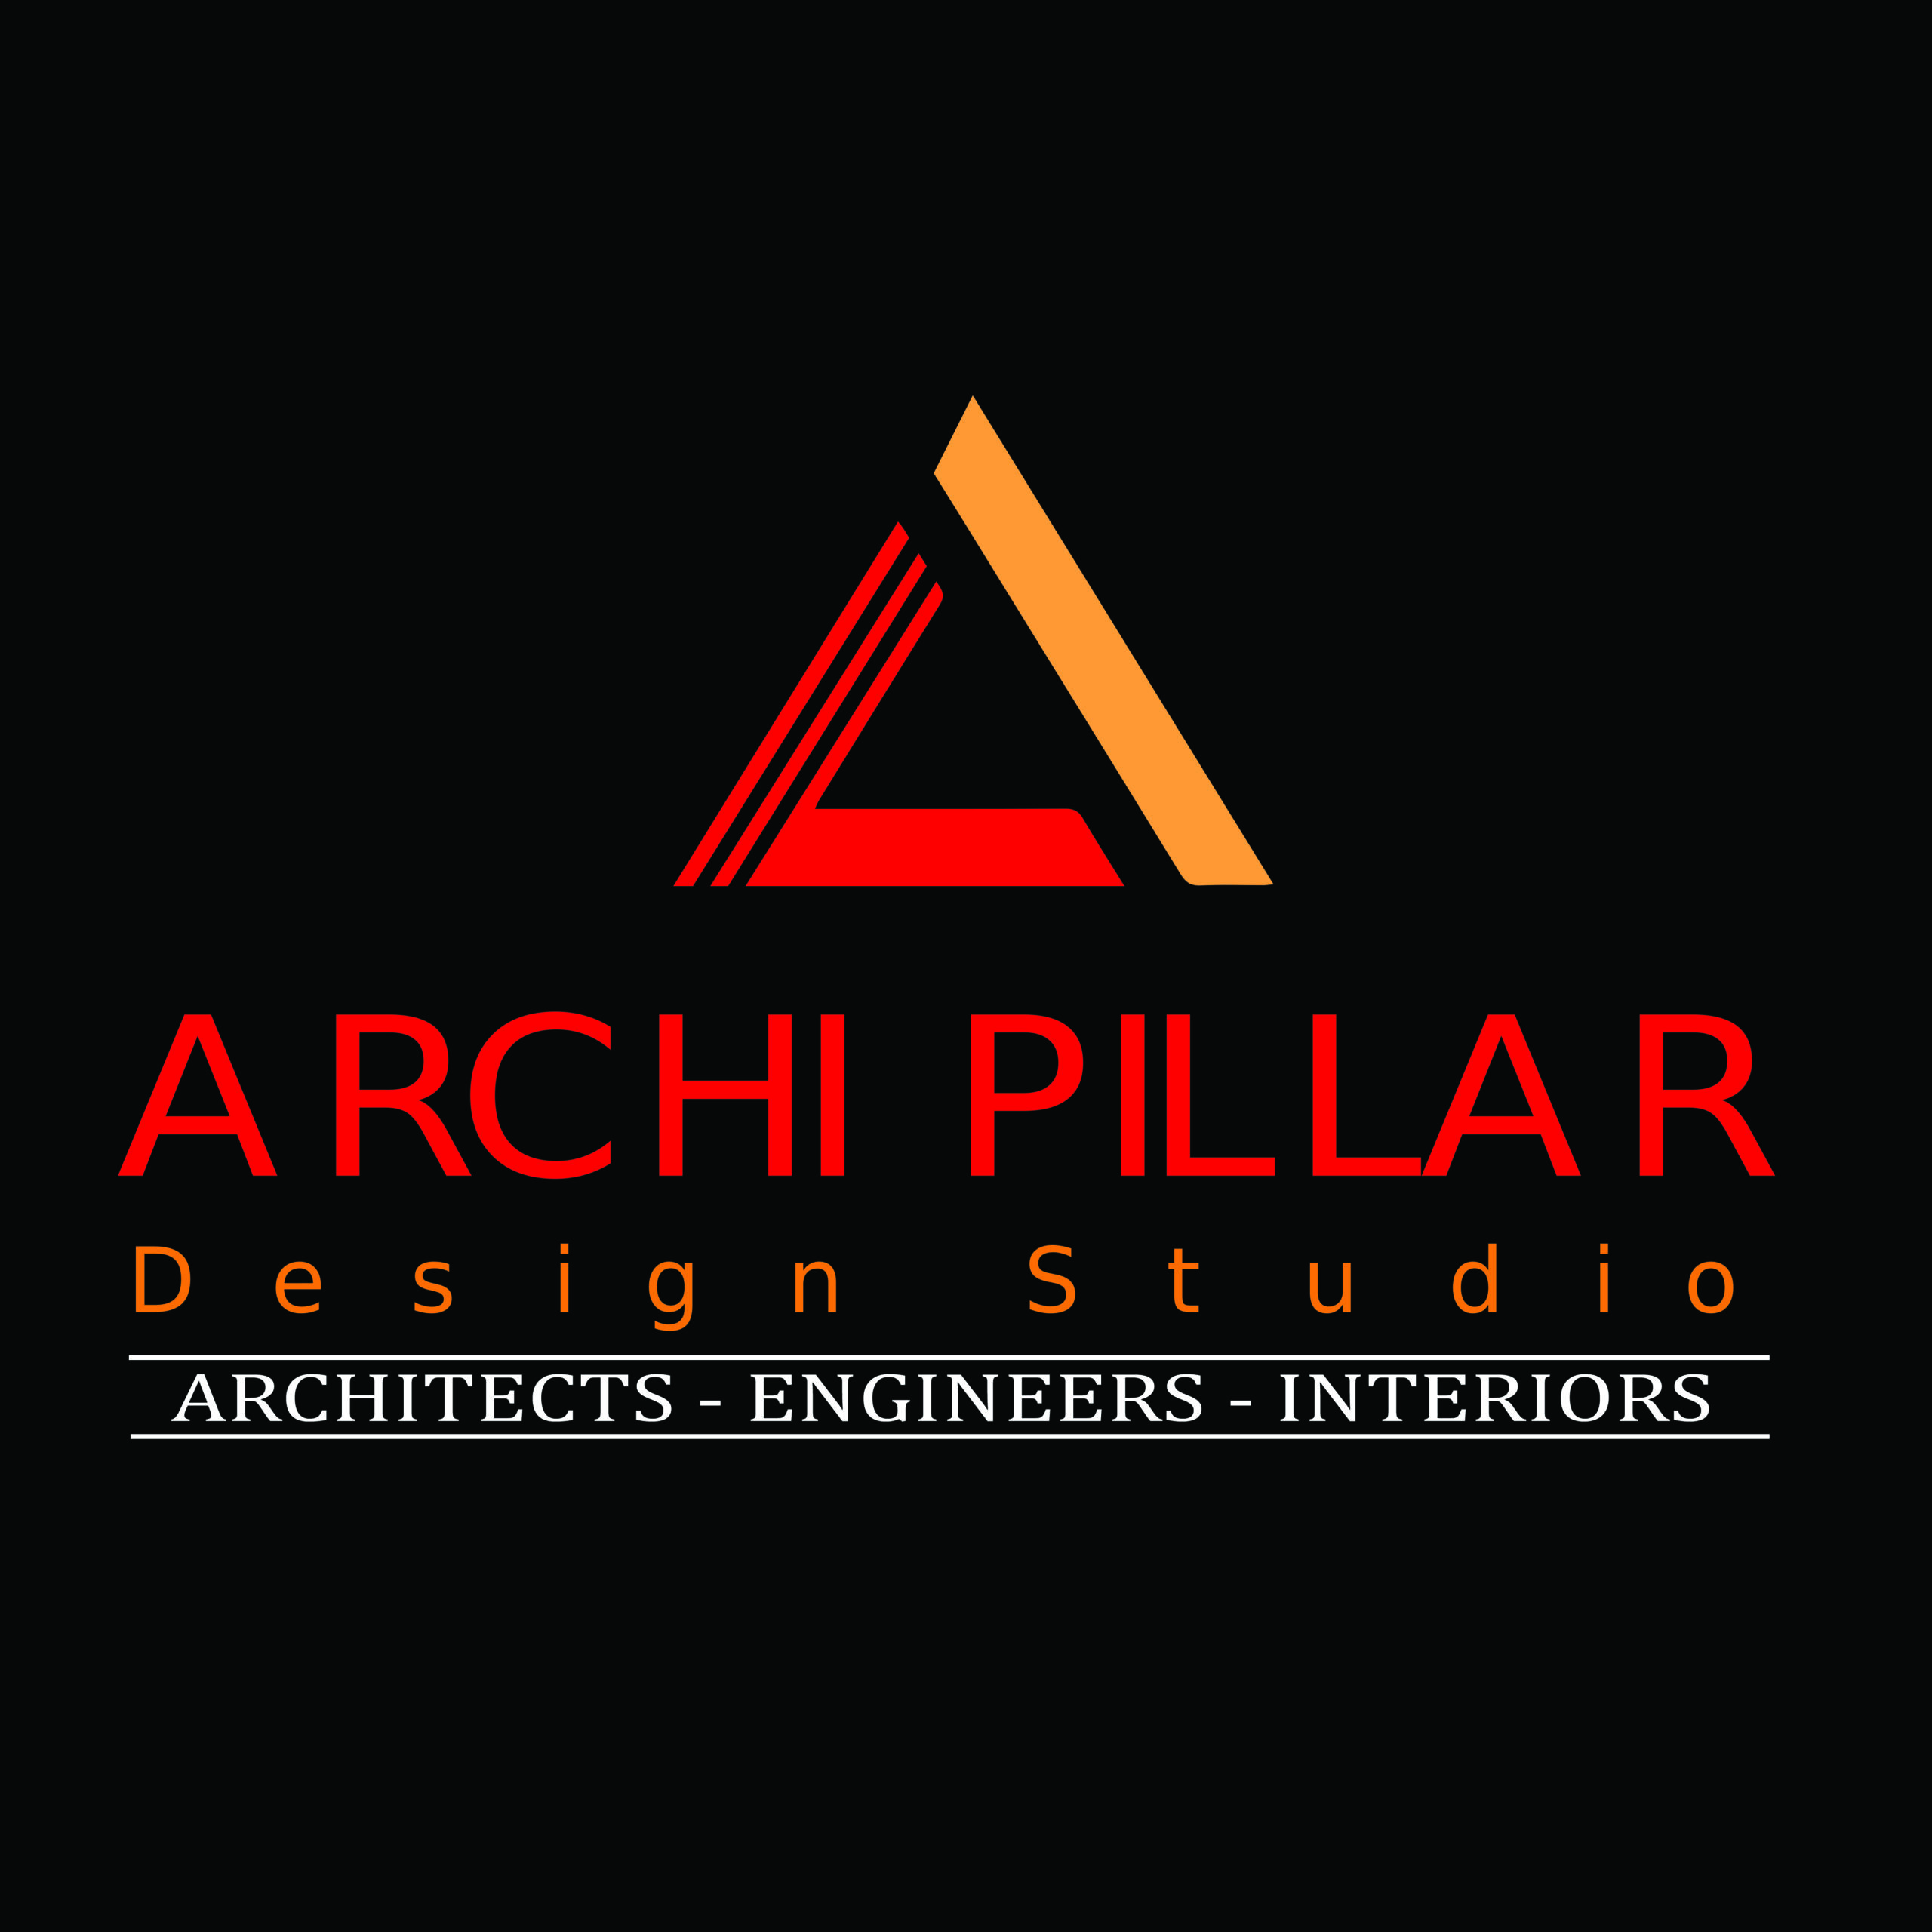 ARCHI PILLAR DESIGN STUDIO (ARCHITECTS-ENGINEERS-INTERIORS-CONSULTANTS)|Accounting Services|Professional Services